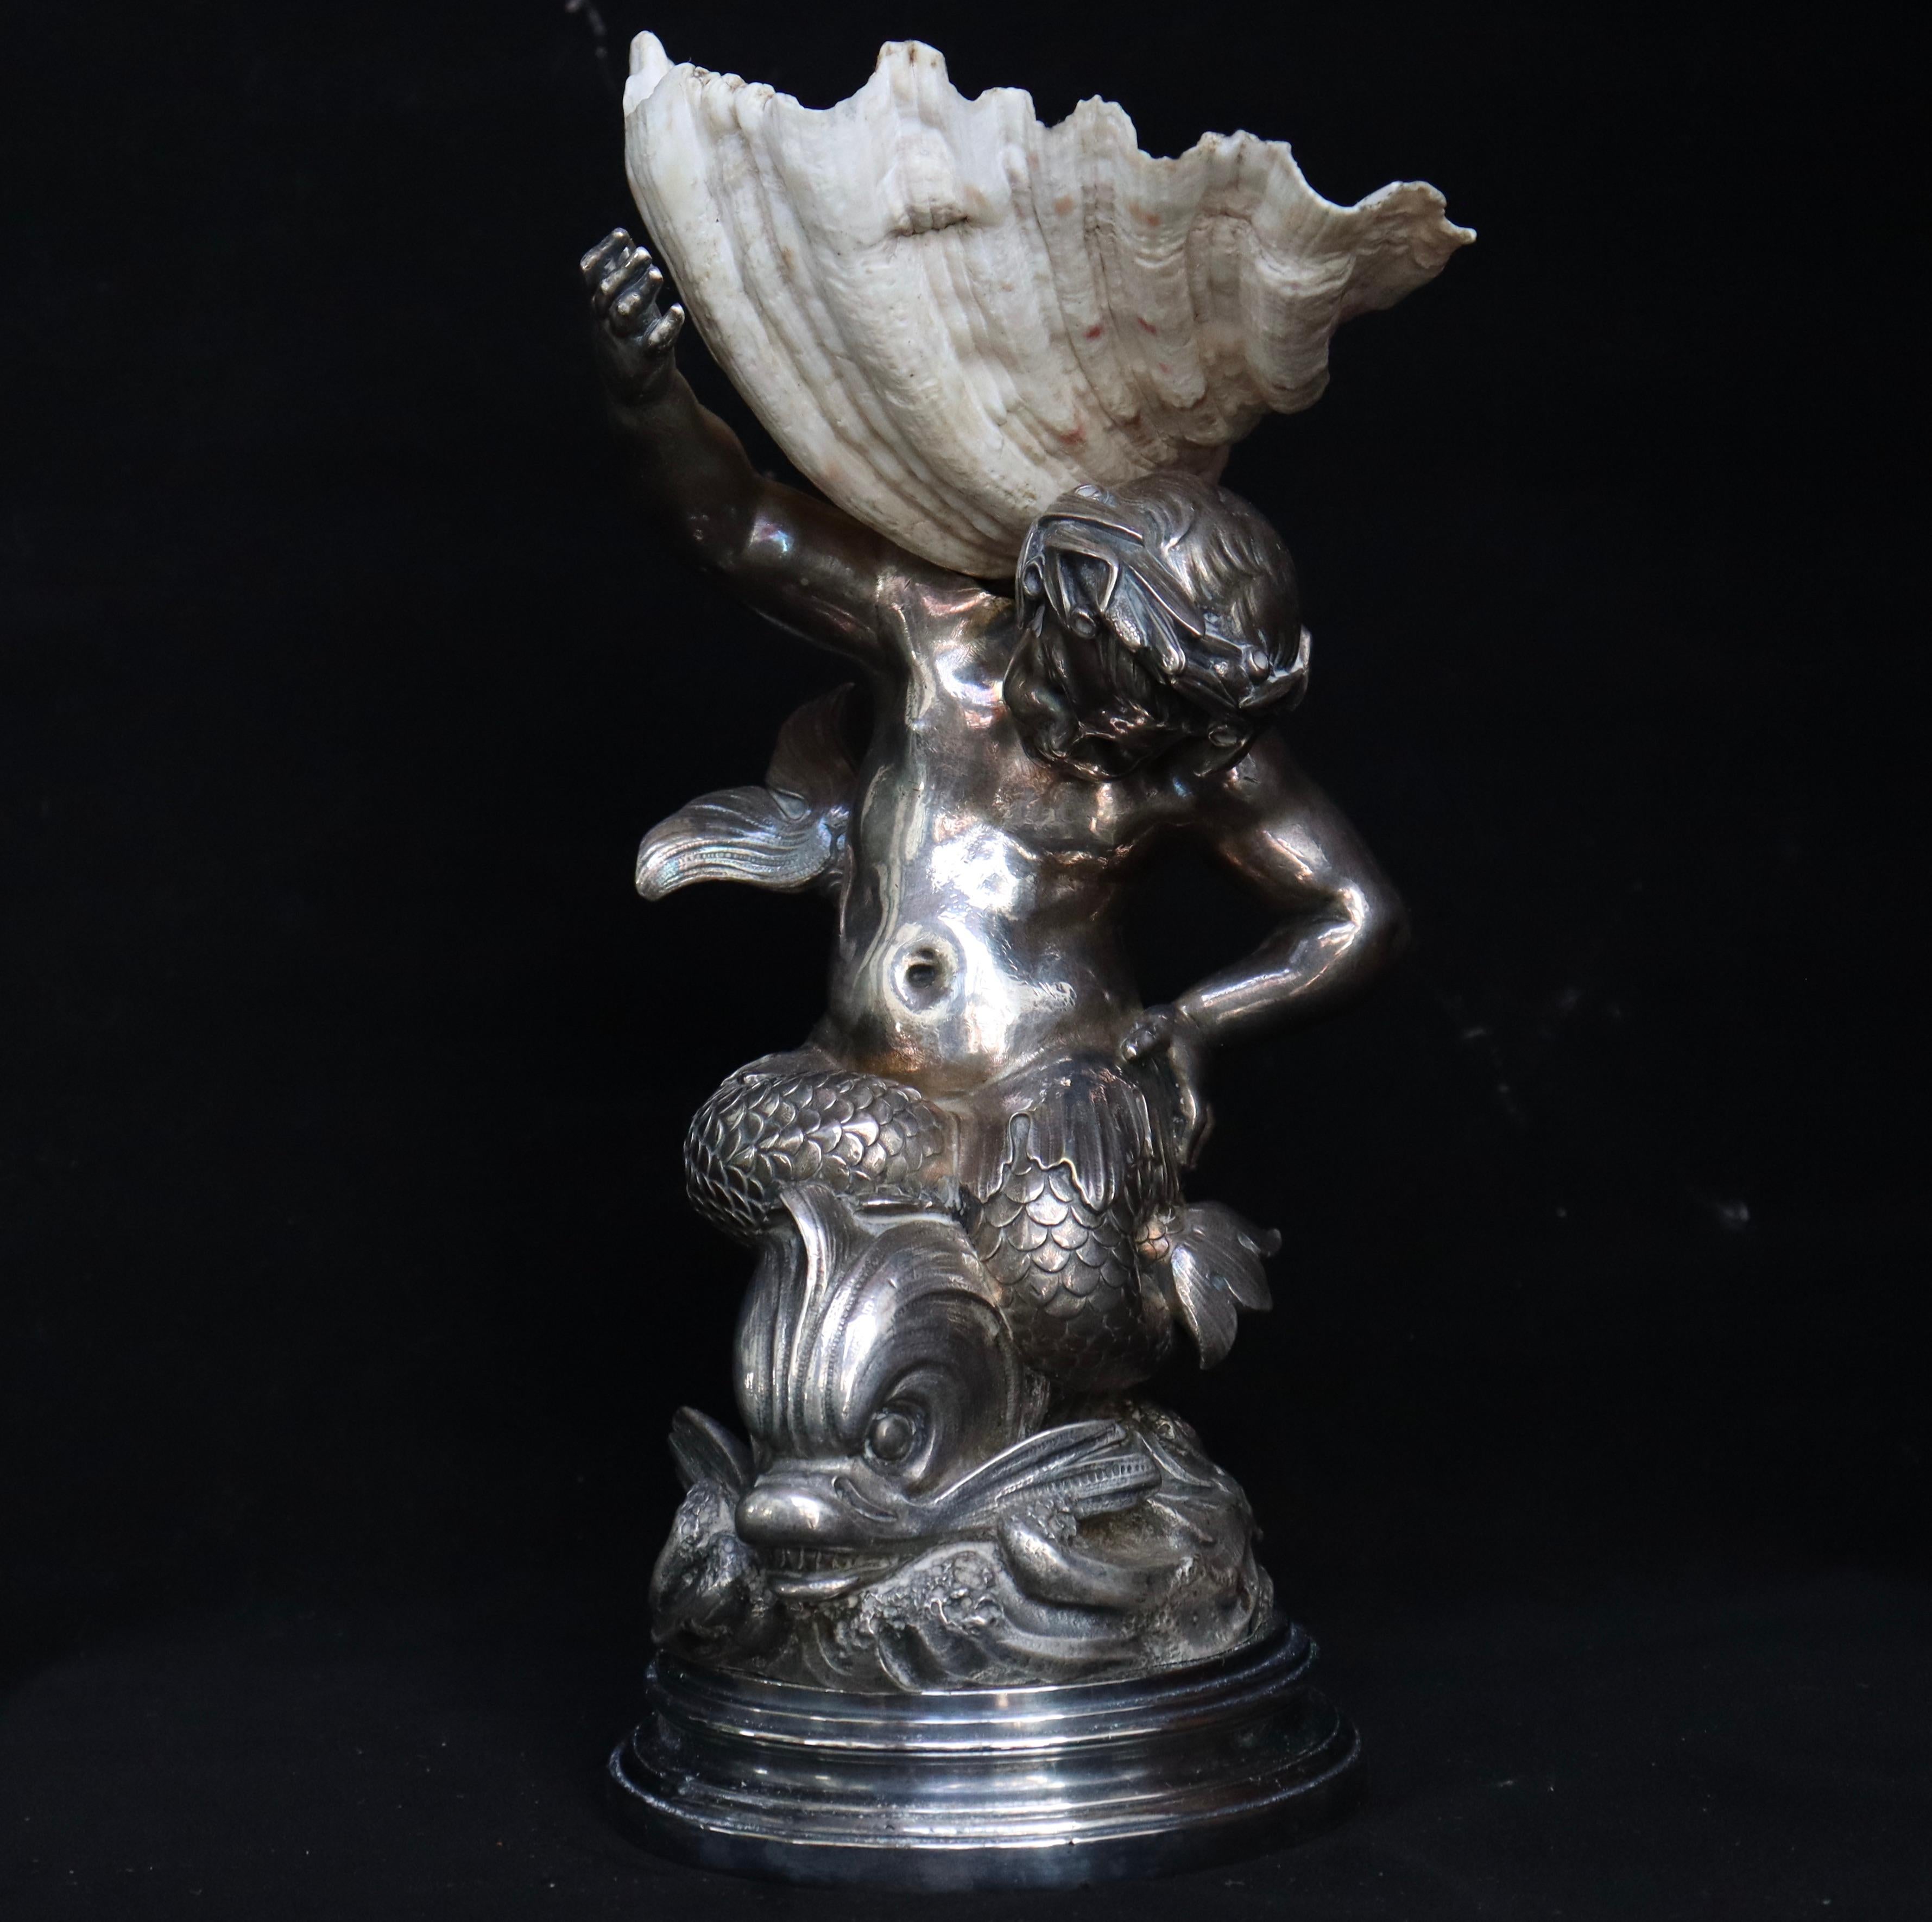 Baroque 19th Century French Silvered Bronze-Mounted Shell Centerpiece Tazza